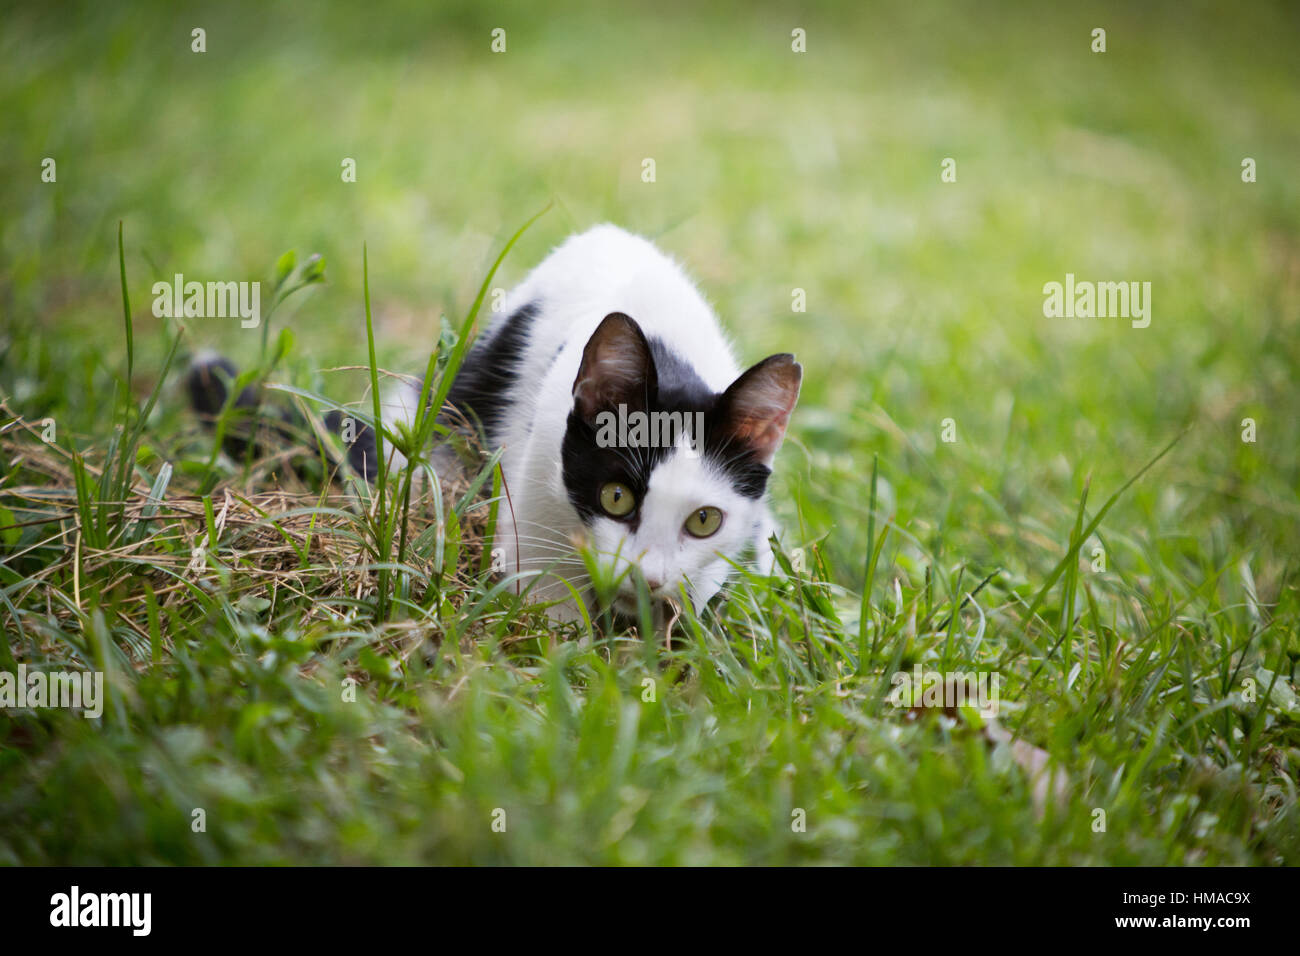 A street cat hunts and eats an earthworm from wet soil in the backyard during humid day, Asuncion, Paraguay Stock Photo